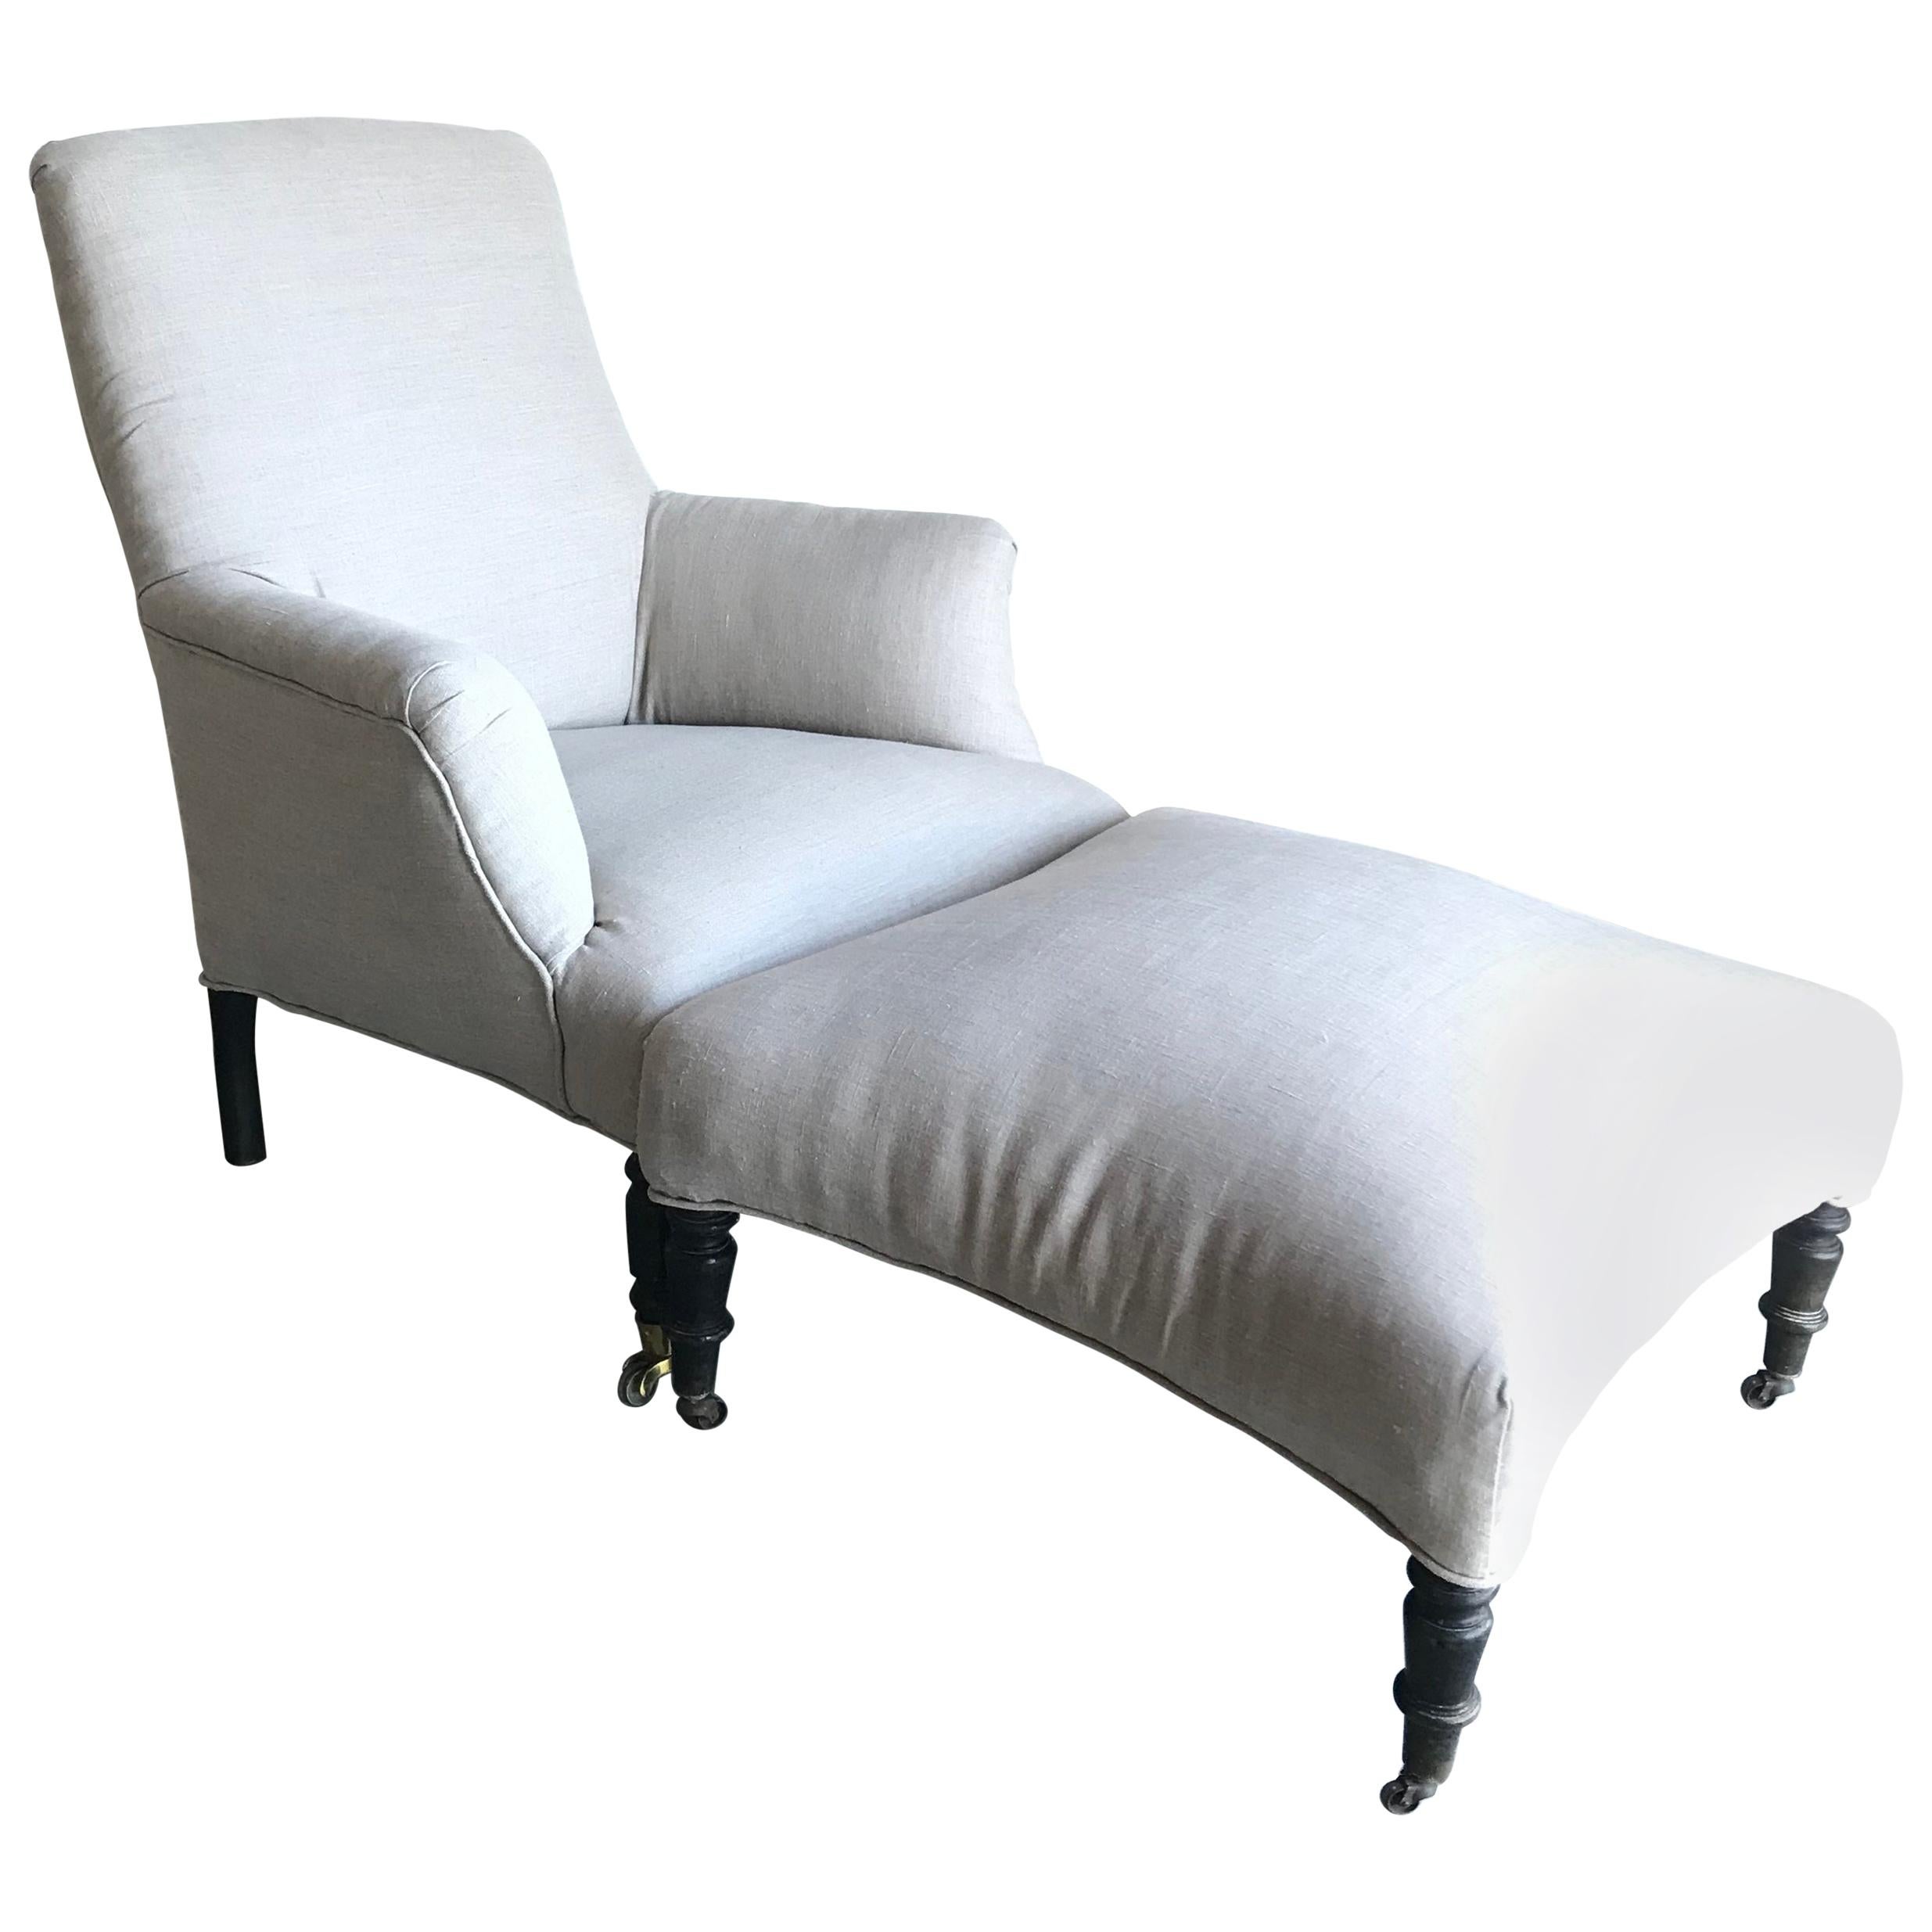 French Chair and Ottoman Chaise Lounge Set